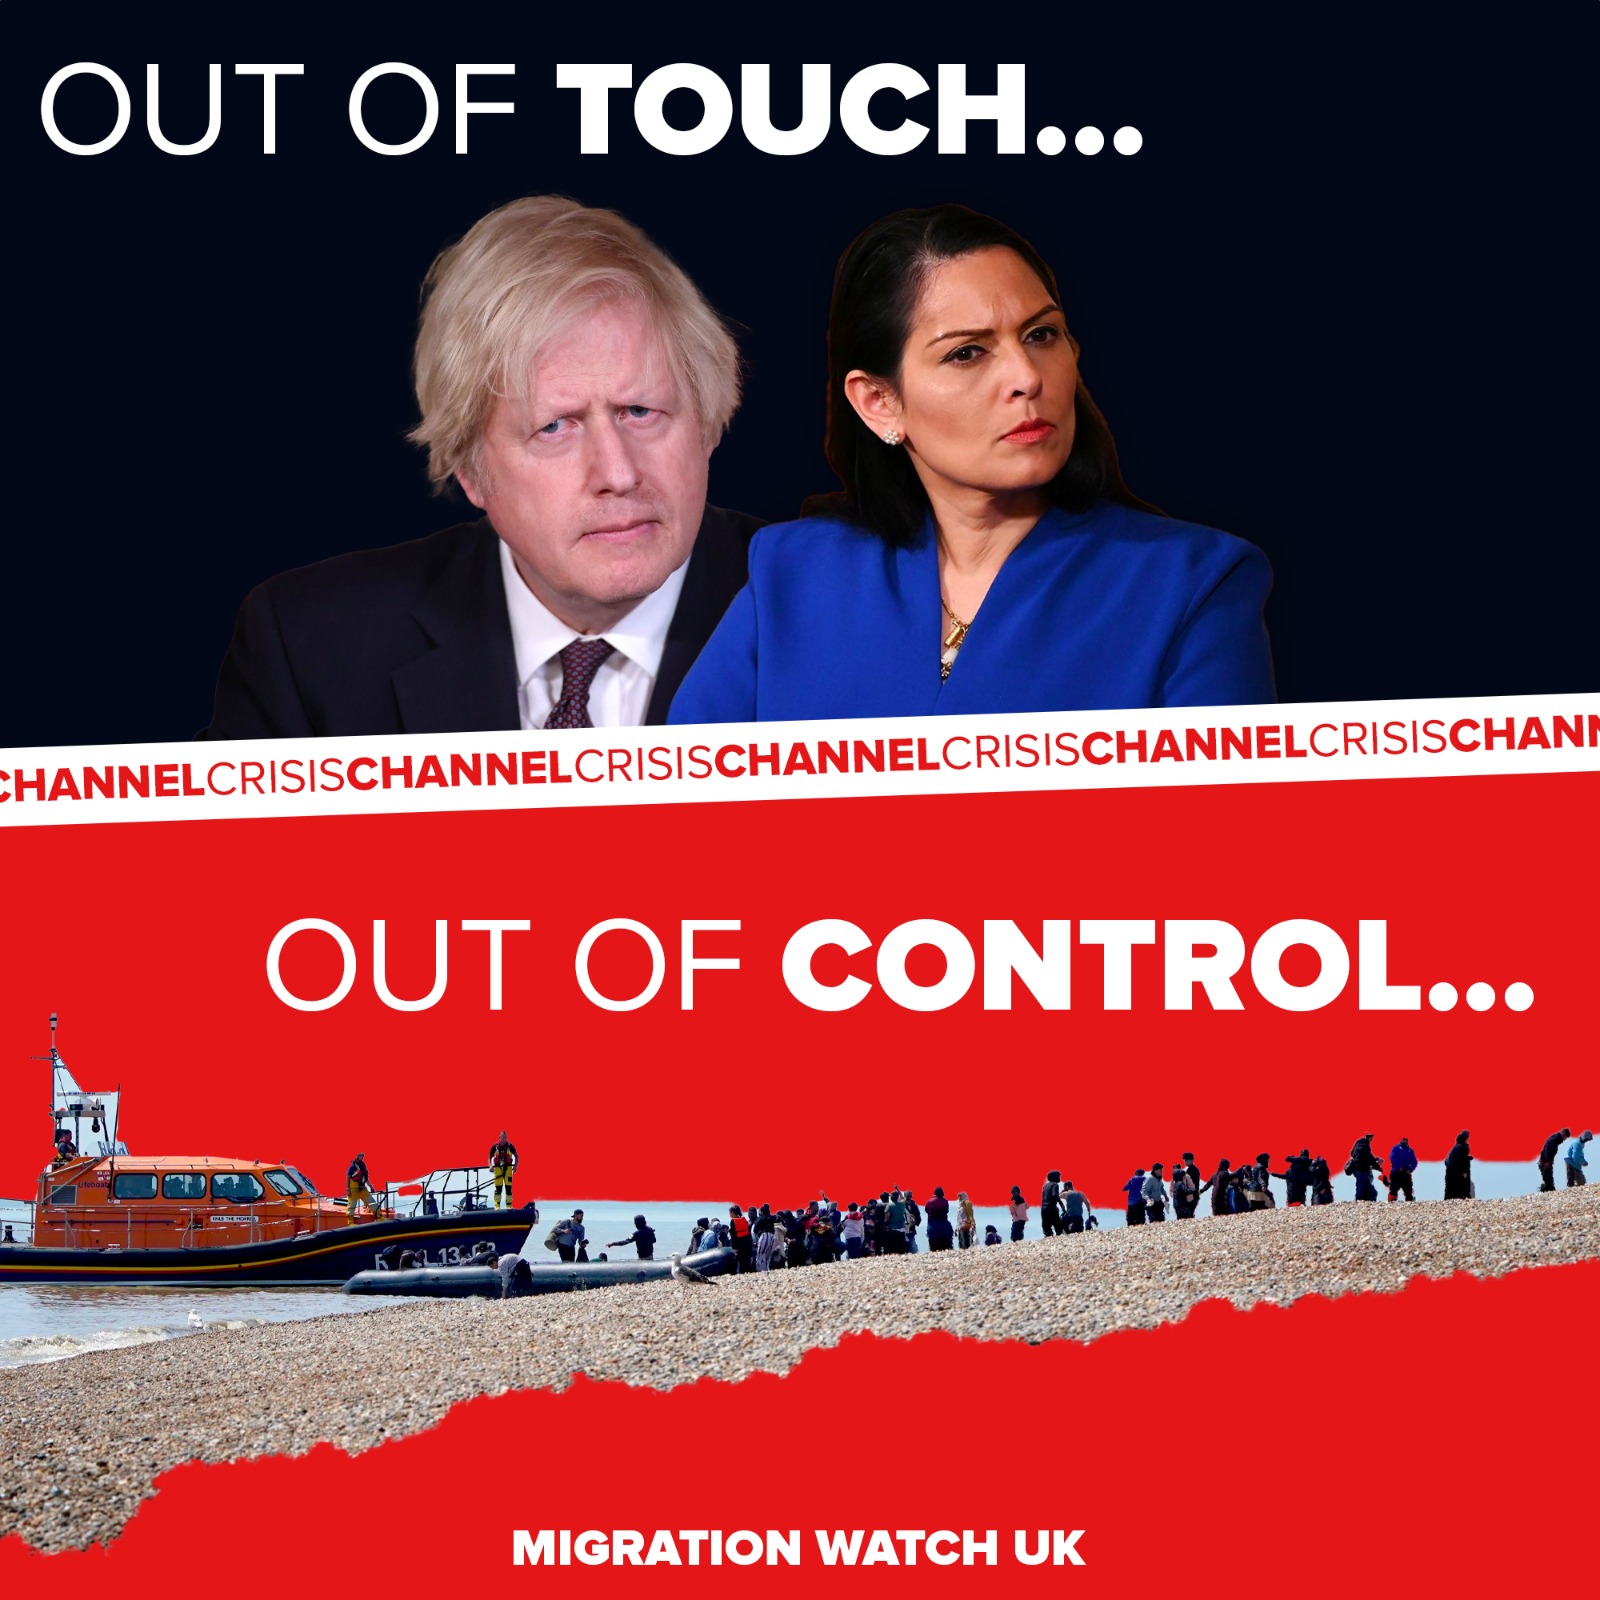 britain-not-obliged-to-take-in-europes-failed-asylum-claimants-parliamentary-committee